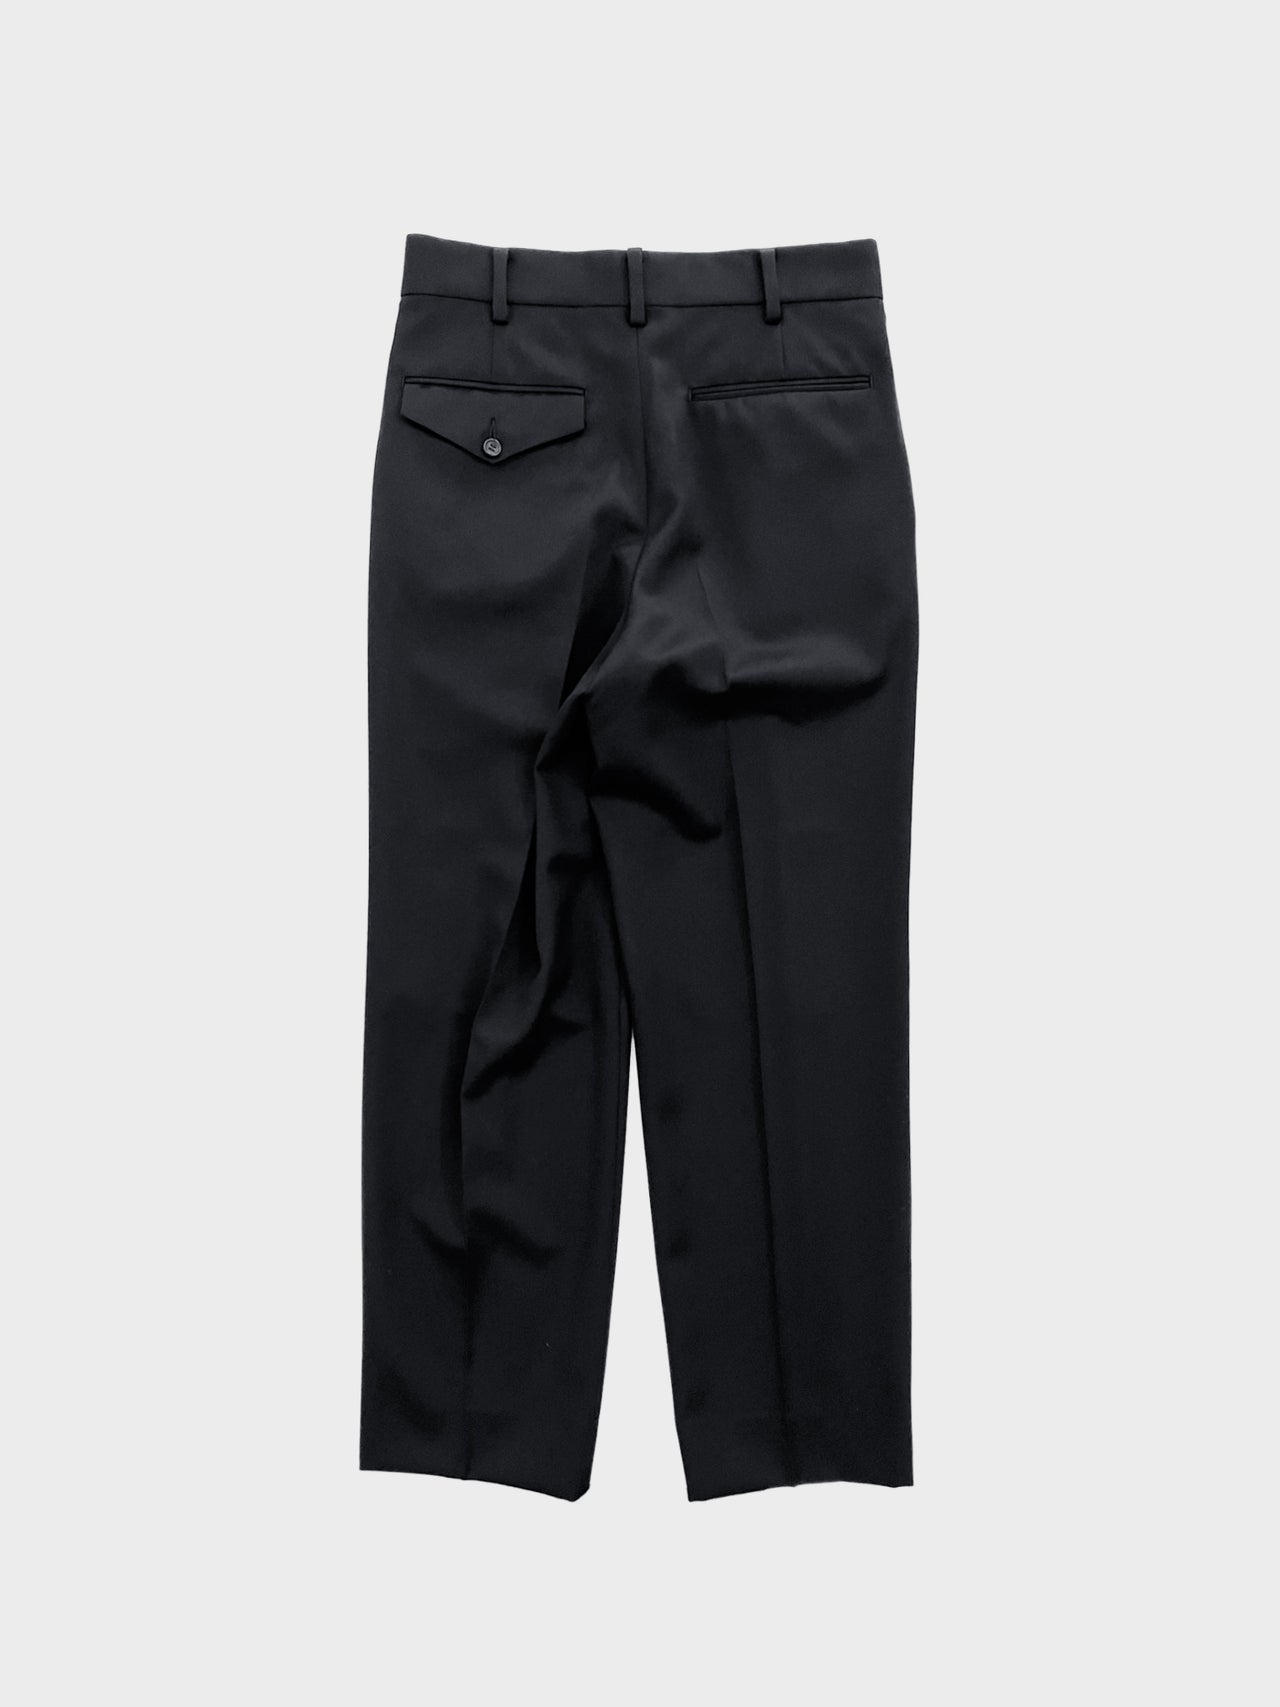 WEWILL / 2 TUCK DRESS TROUSERS (BLACK)